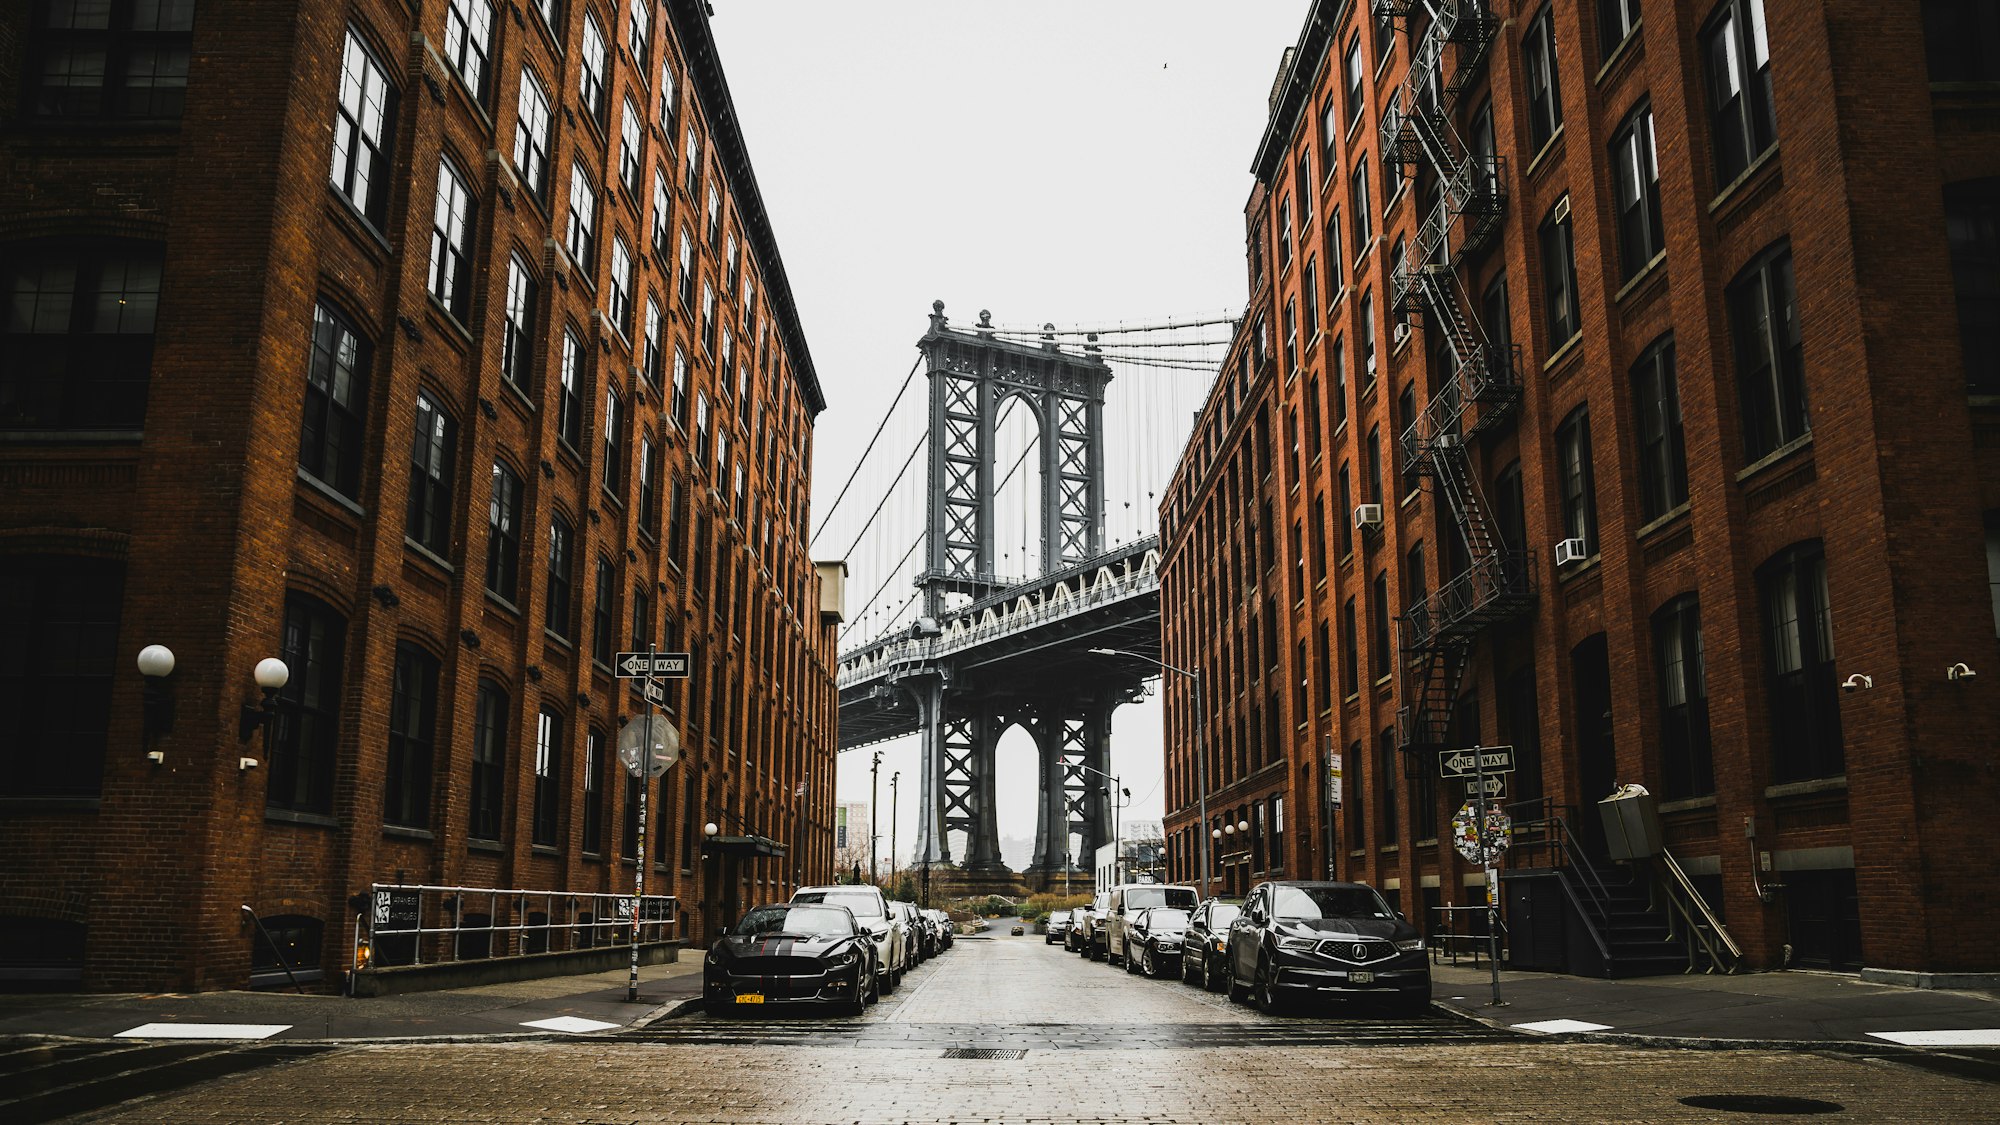 A Brooklyn side street with a view of the Brooklyn Bridge between two brick buildings